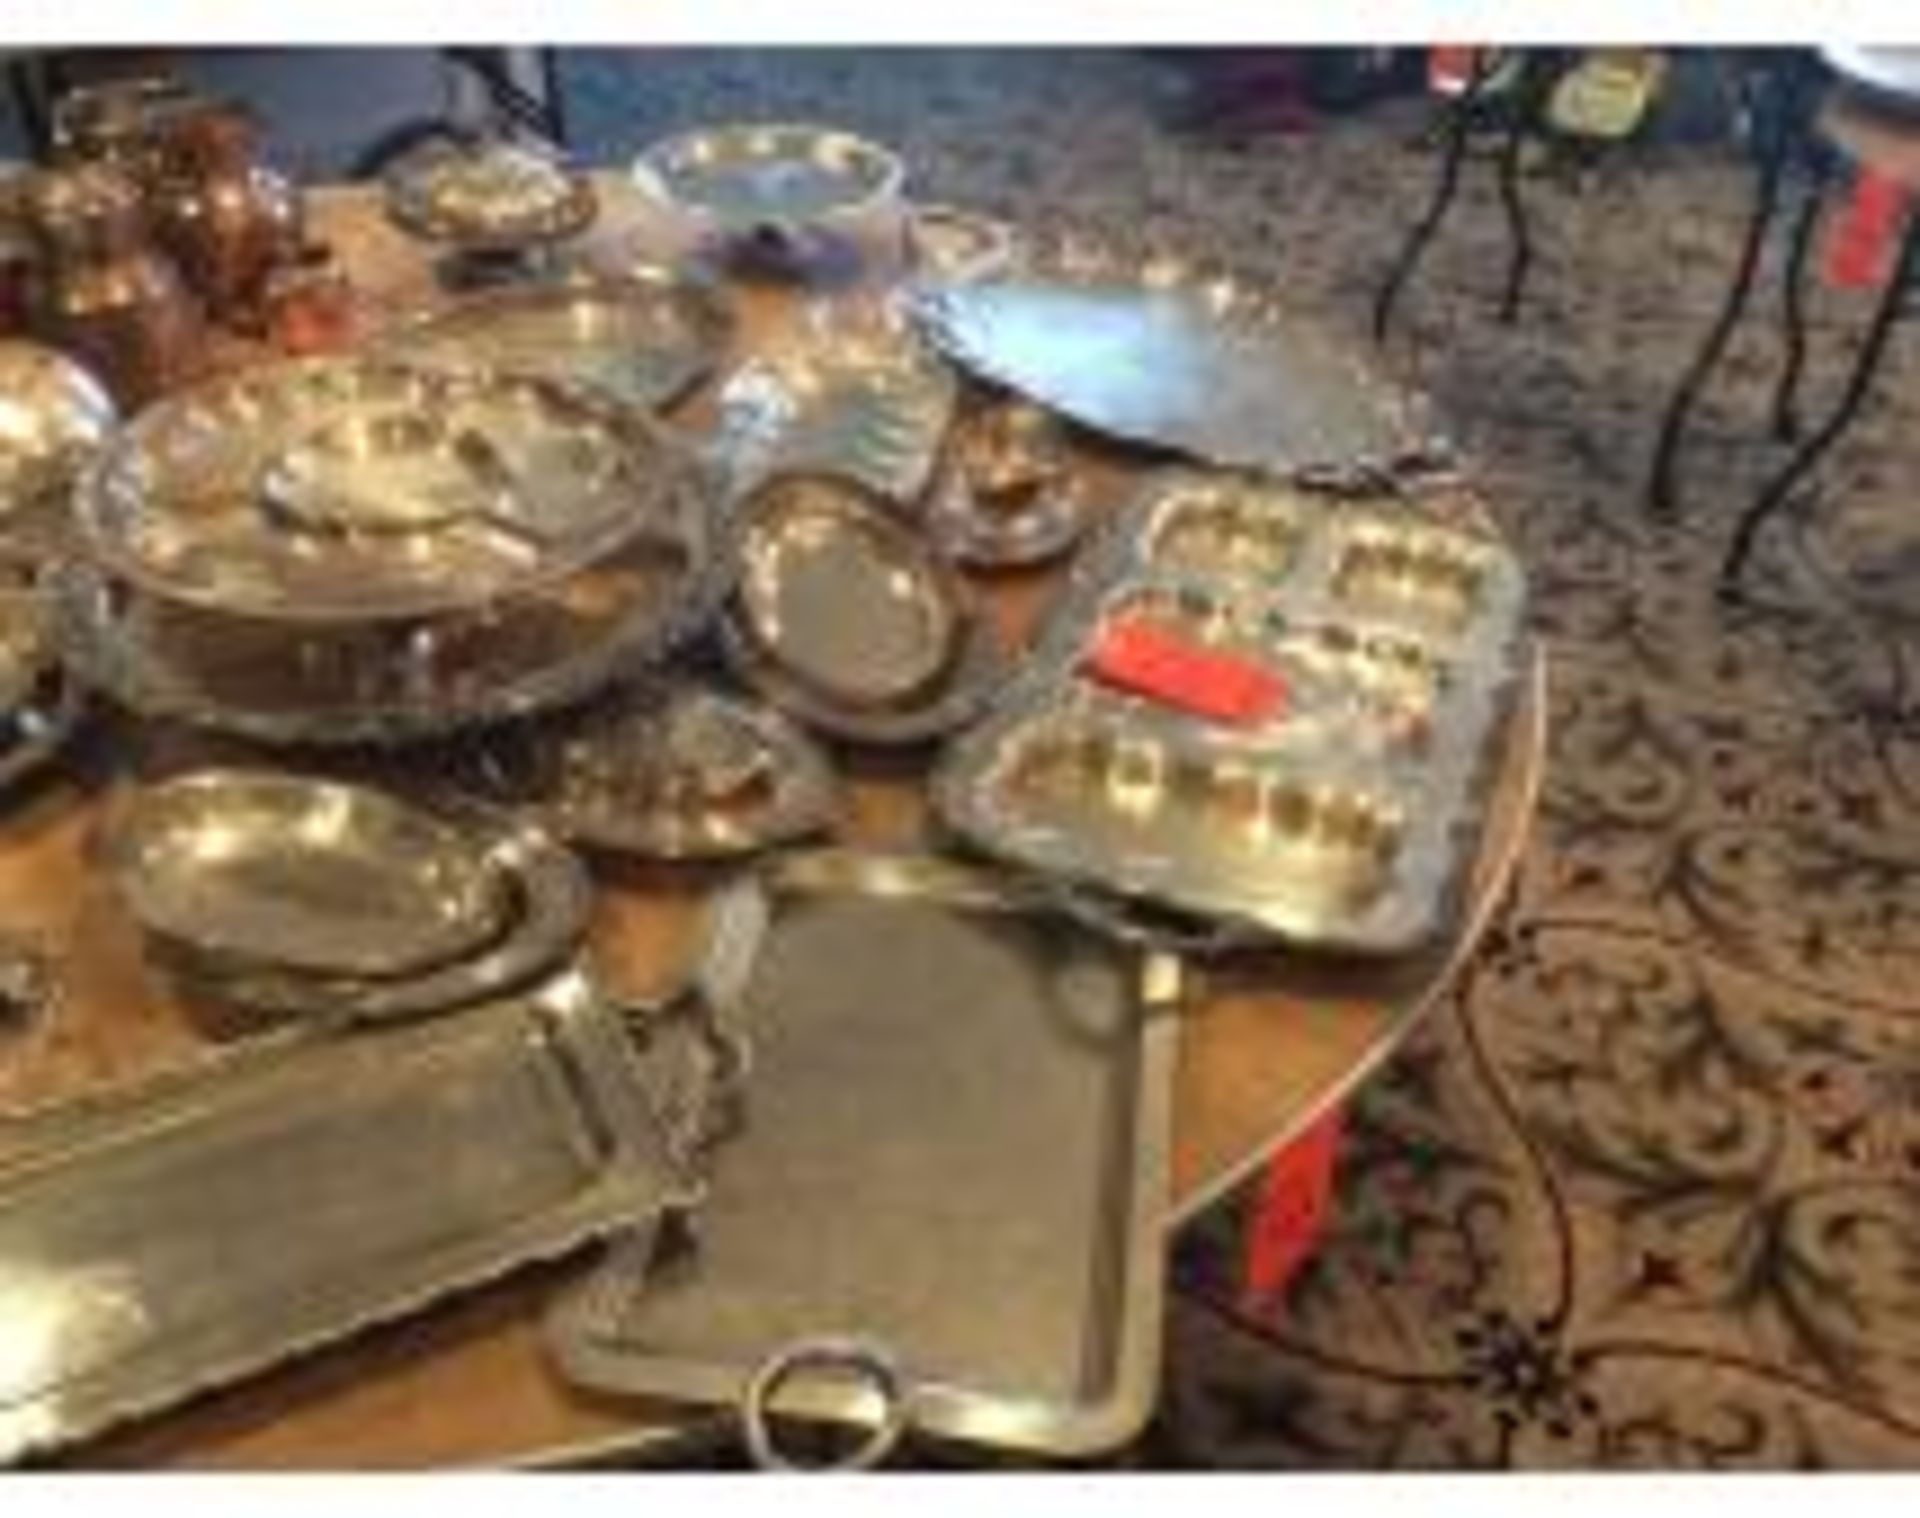 Lot of assorted punch bowls with plastic scoops, silver plated trays, copper serving cups, glassware - Image 4 of 5